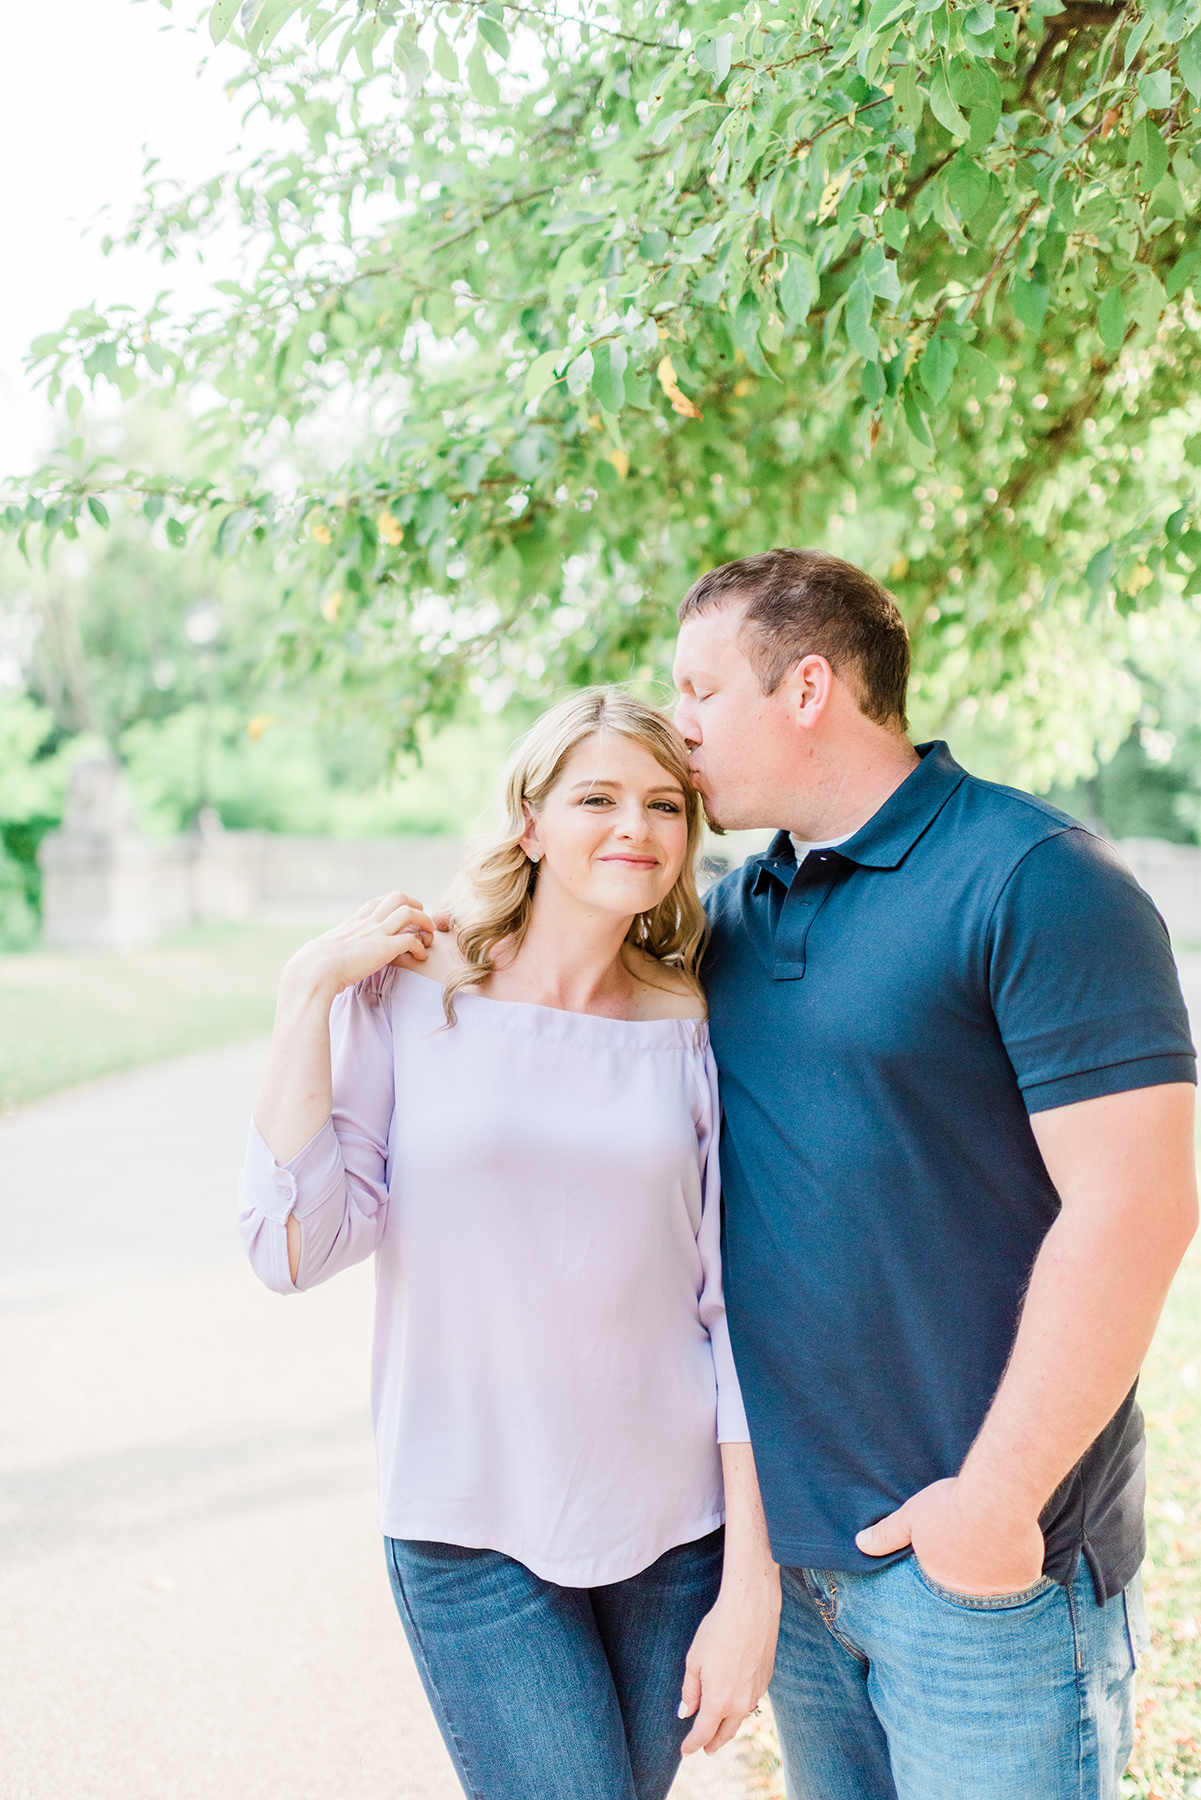 Lake Park Milwaukee Engagement Pictures - Larissa Marie Photography